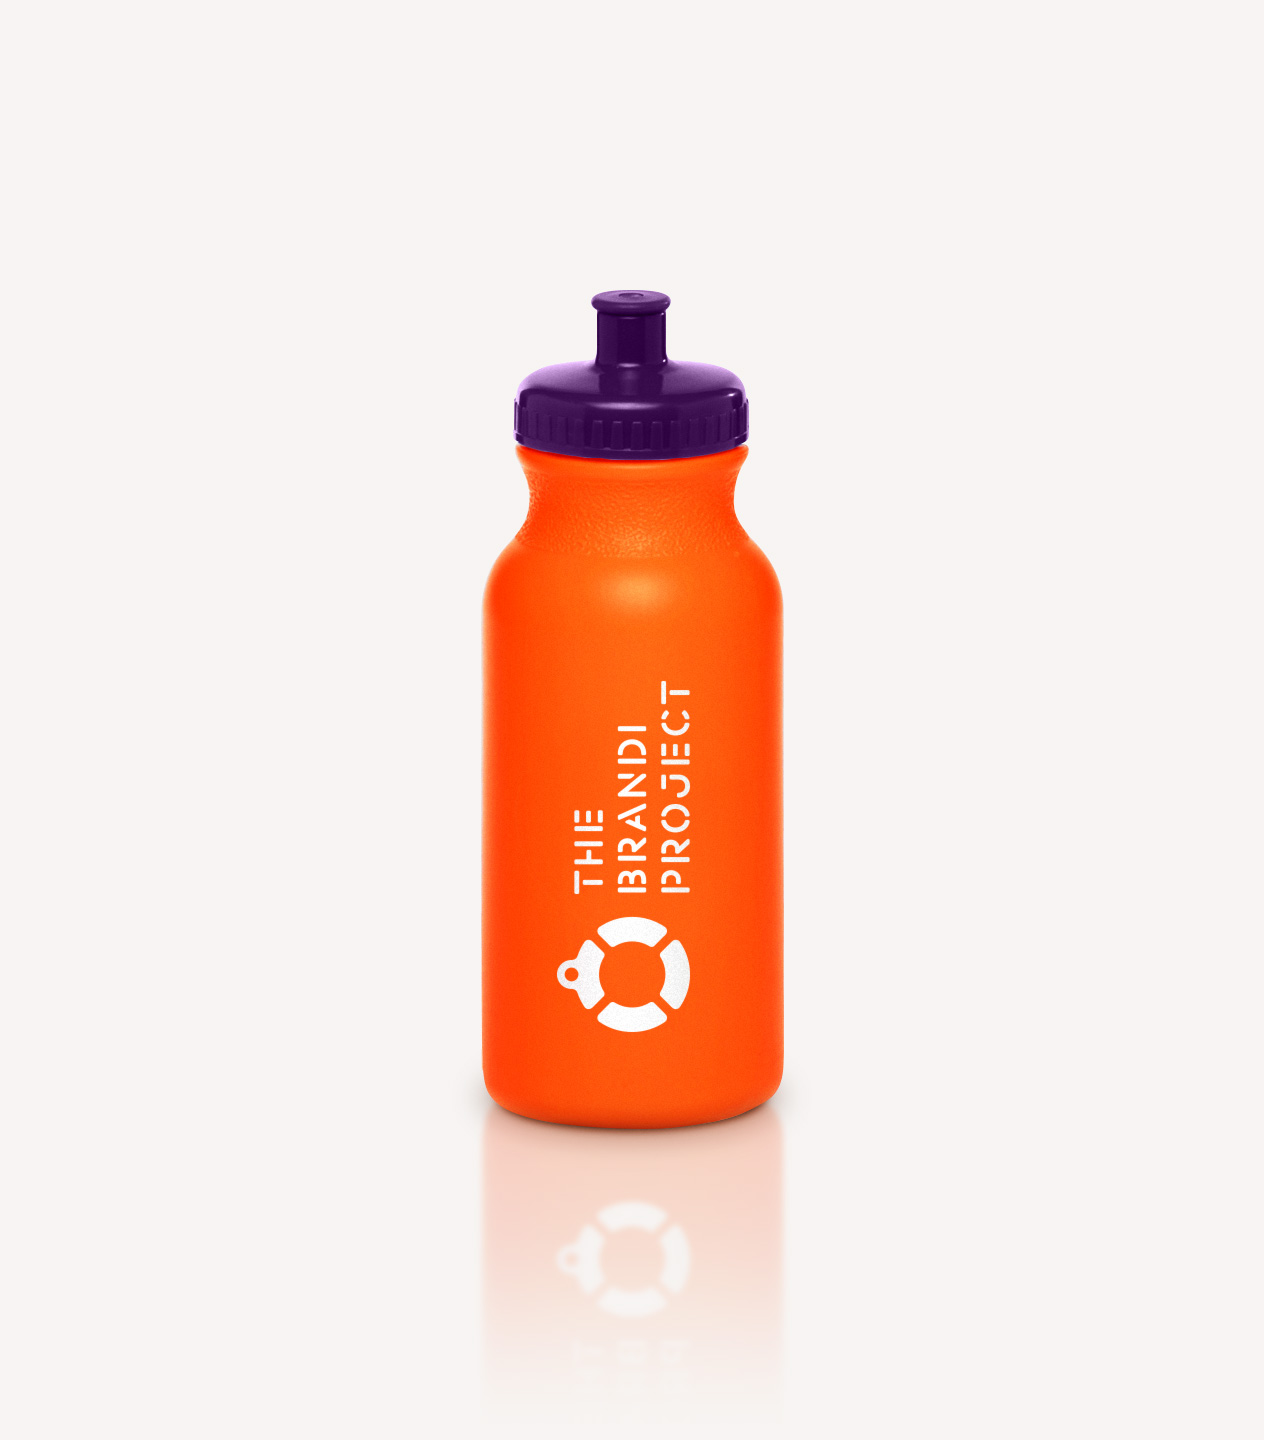 nelsoncouto-work-thebrandiproject-bottle-v2